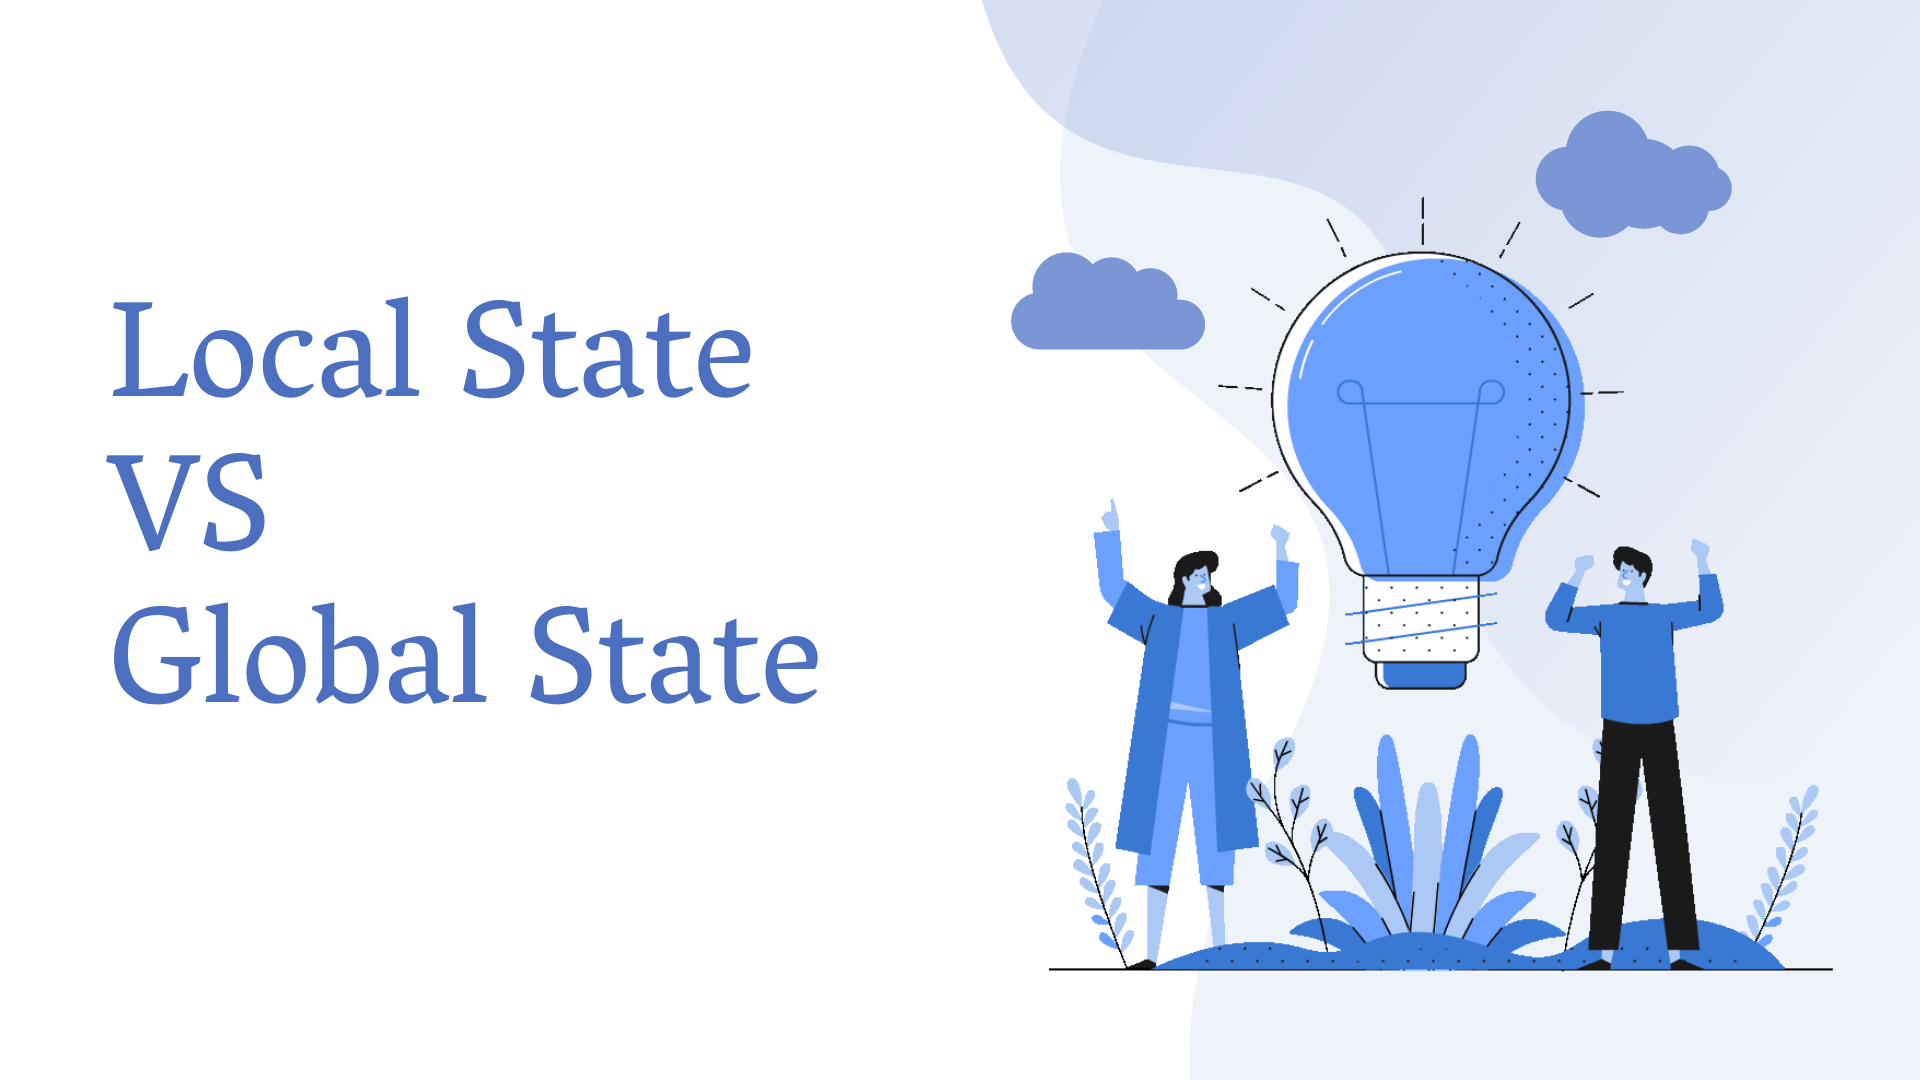 【React】Global State, Local Stateとは？Recoilを例に使い分けを紹介！